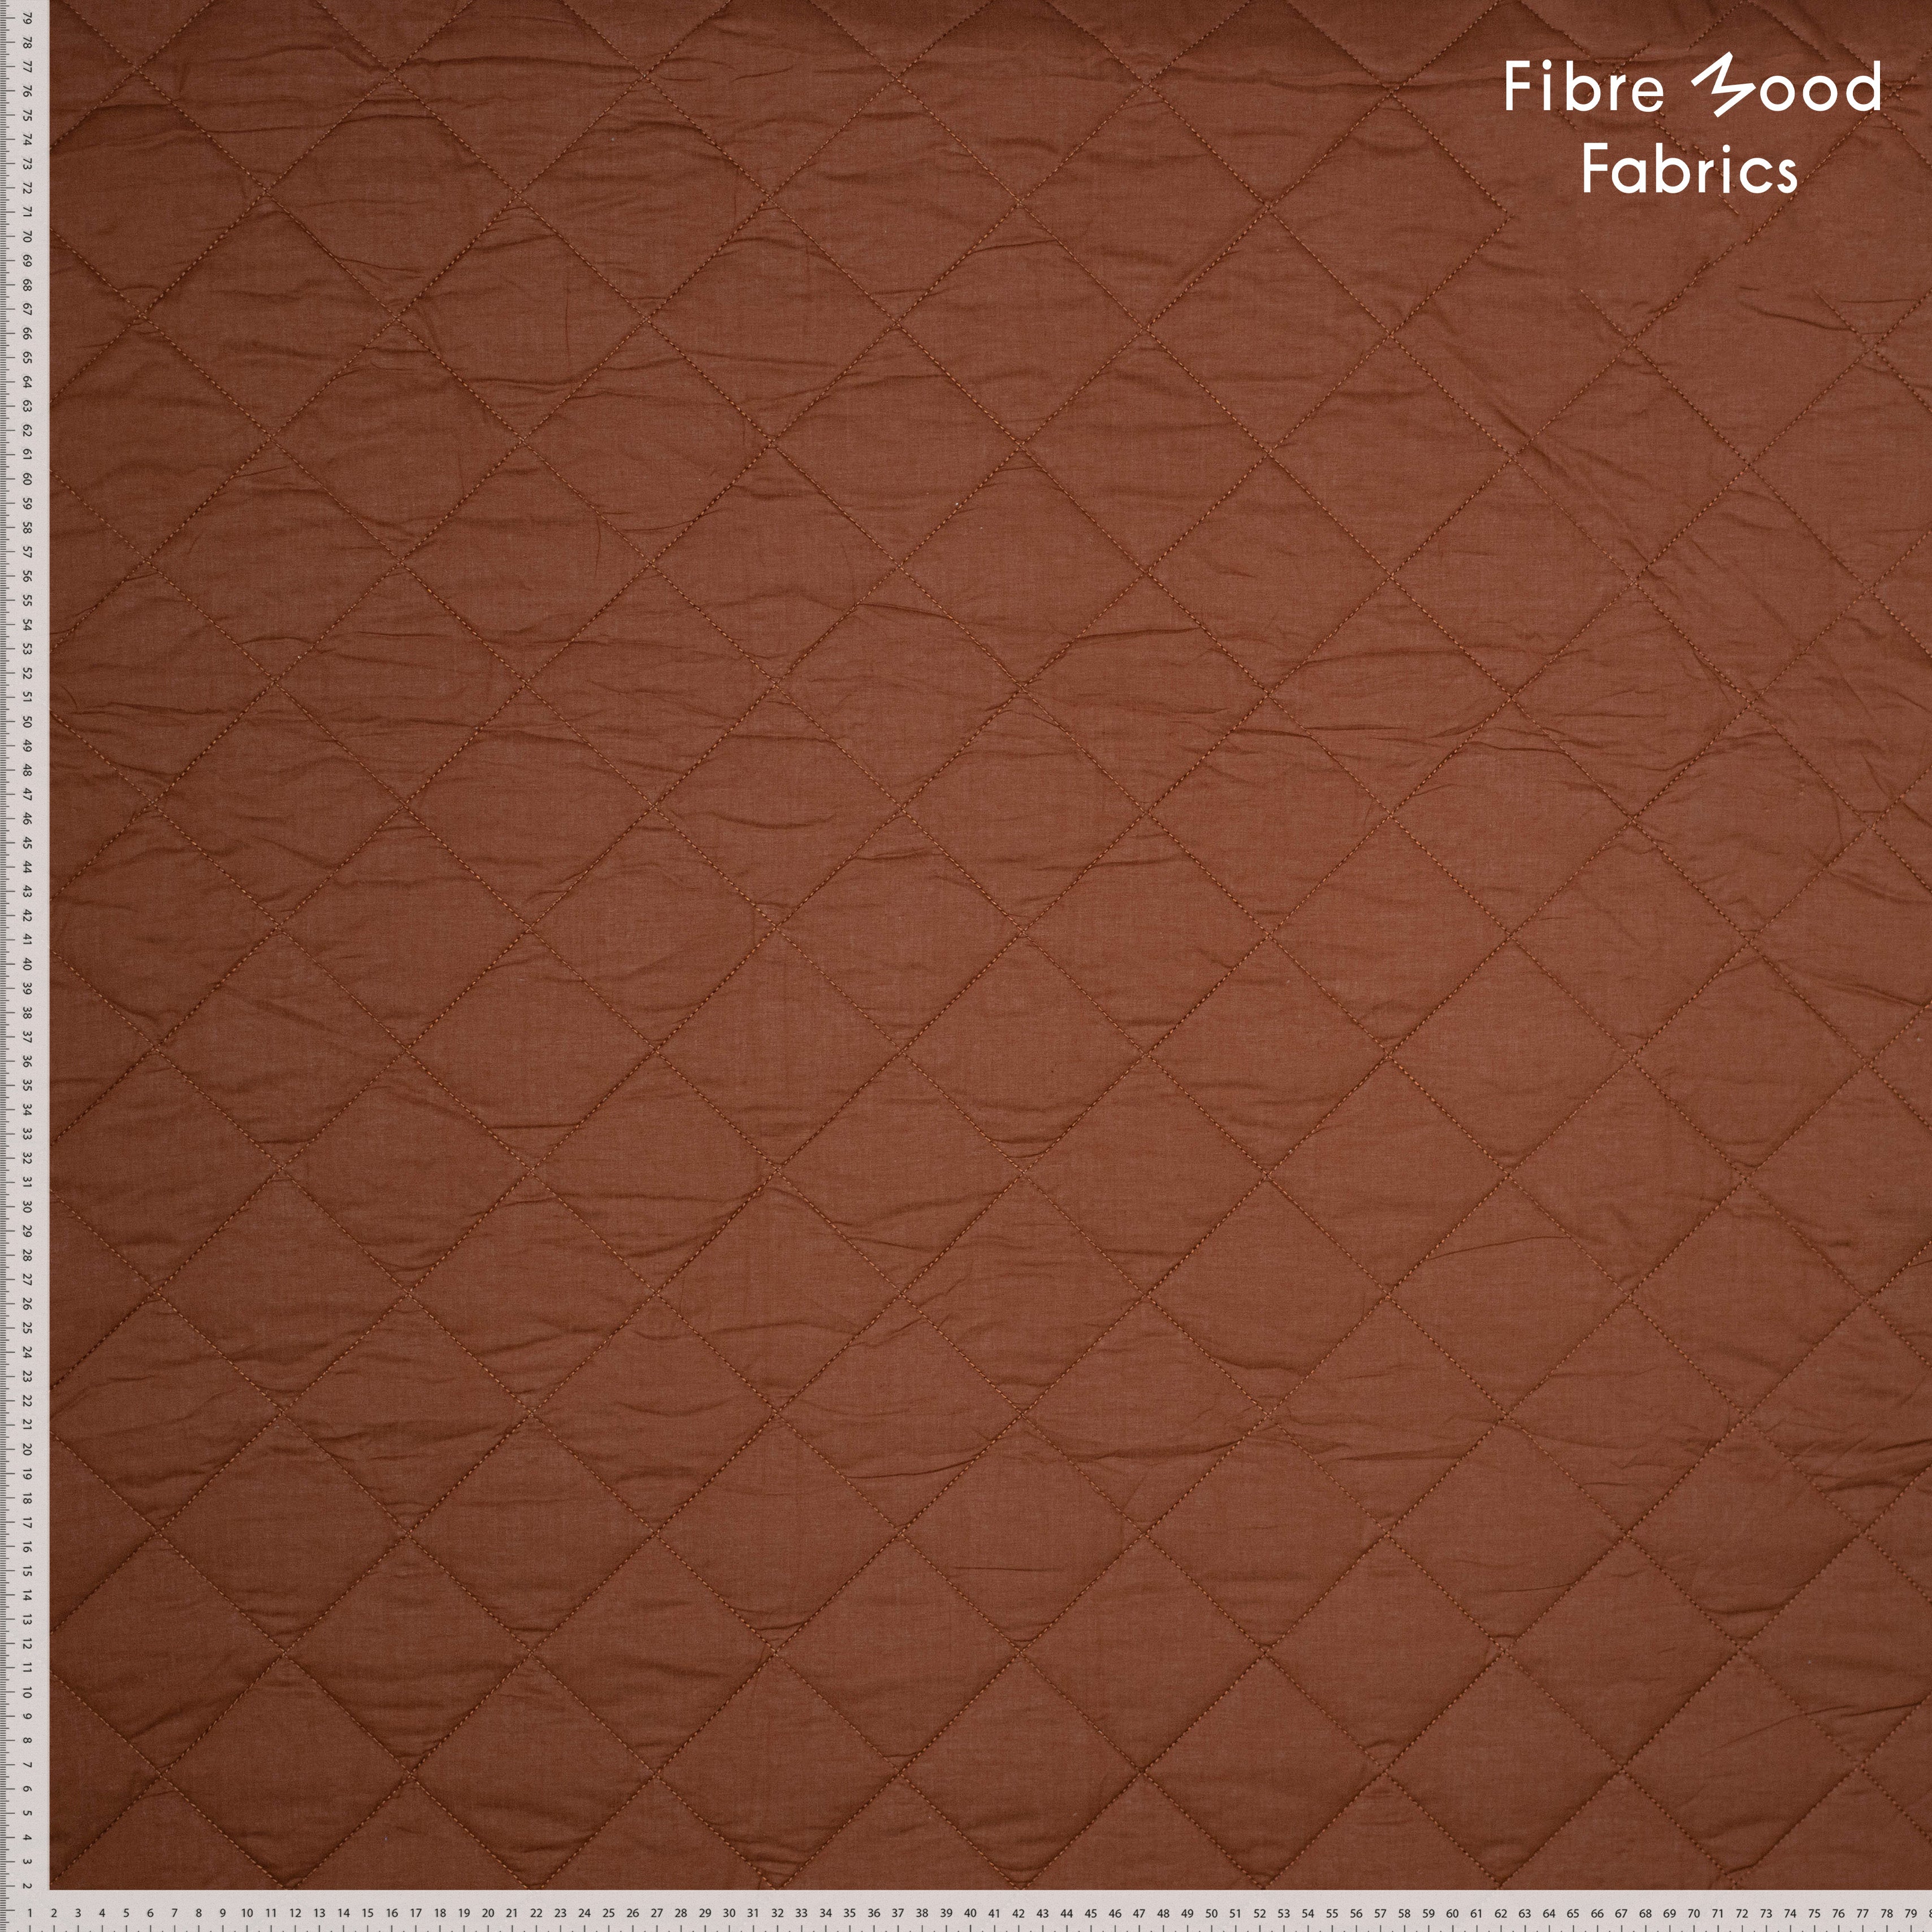 No. 556 cotton quilted brown